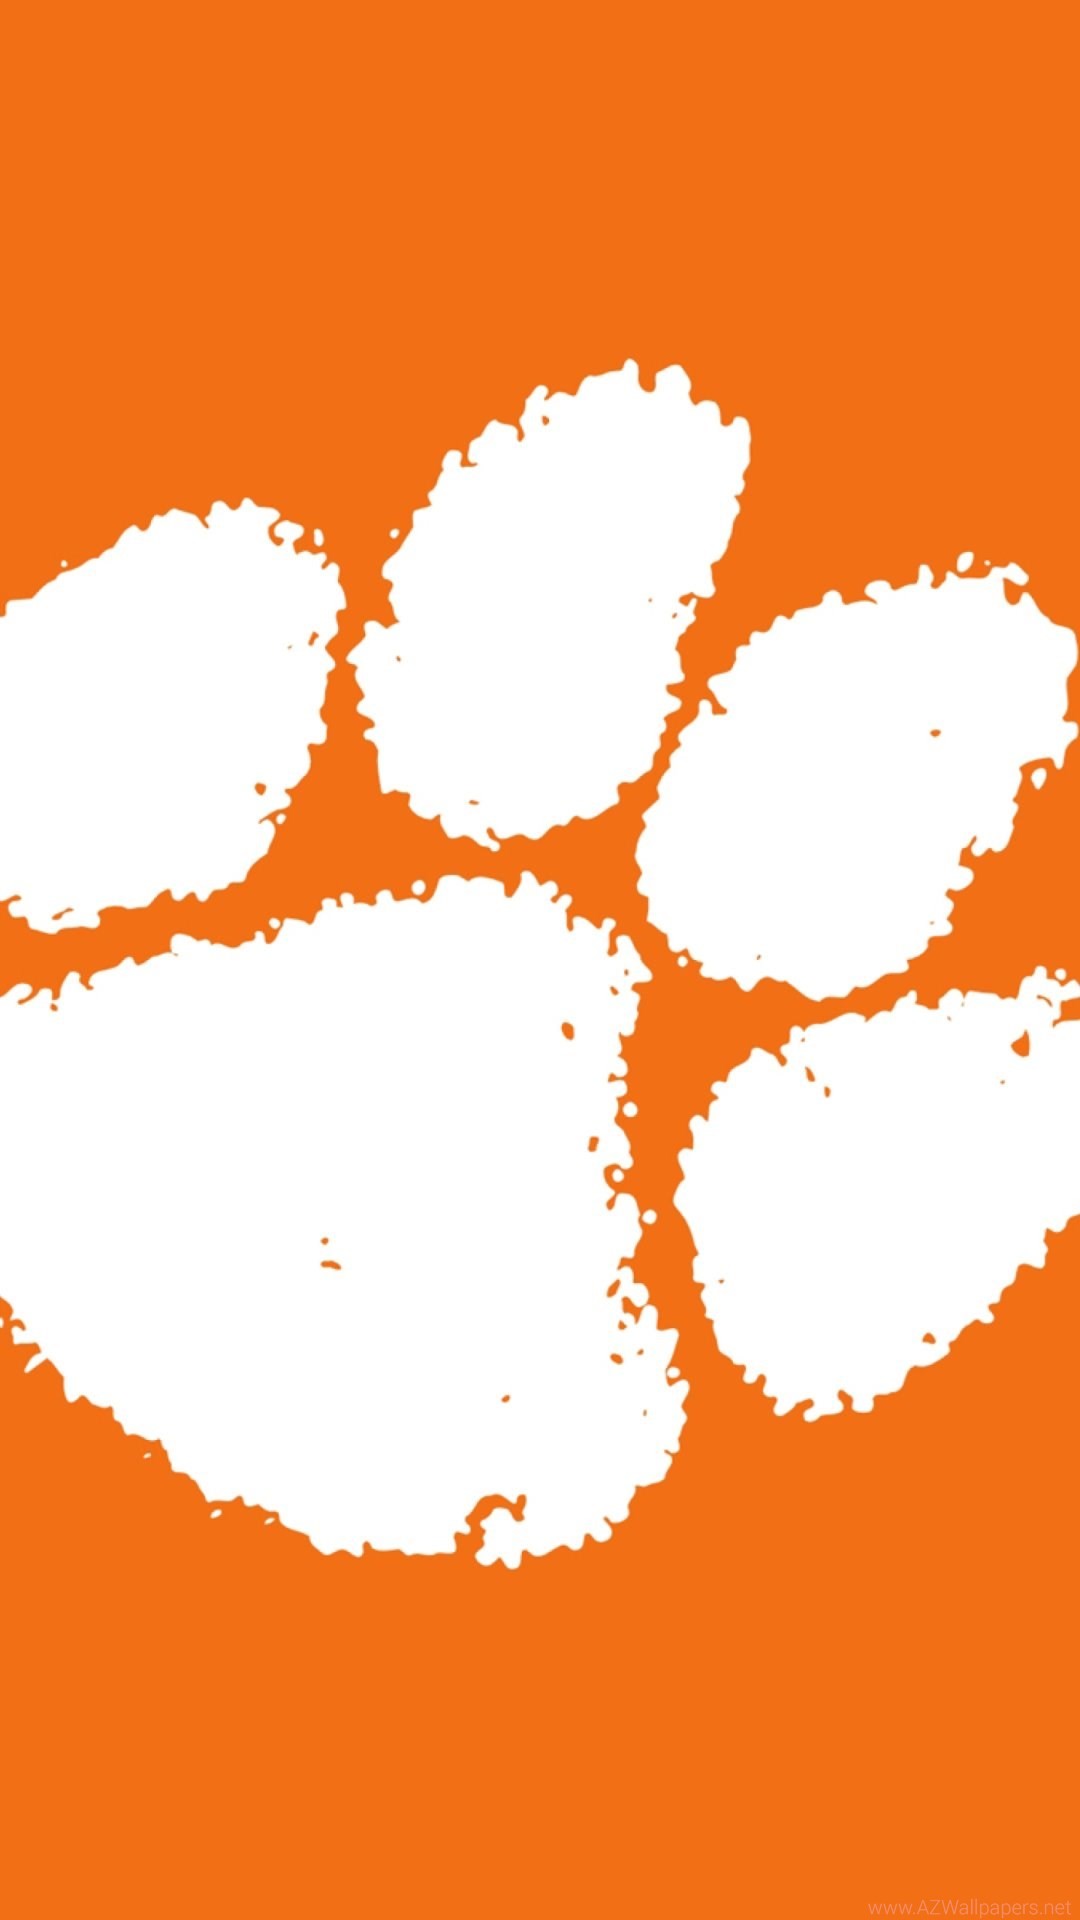 1080x1920 Clemson Tigers Wallpapers For iPhone 6 Plus